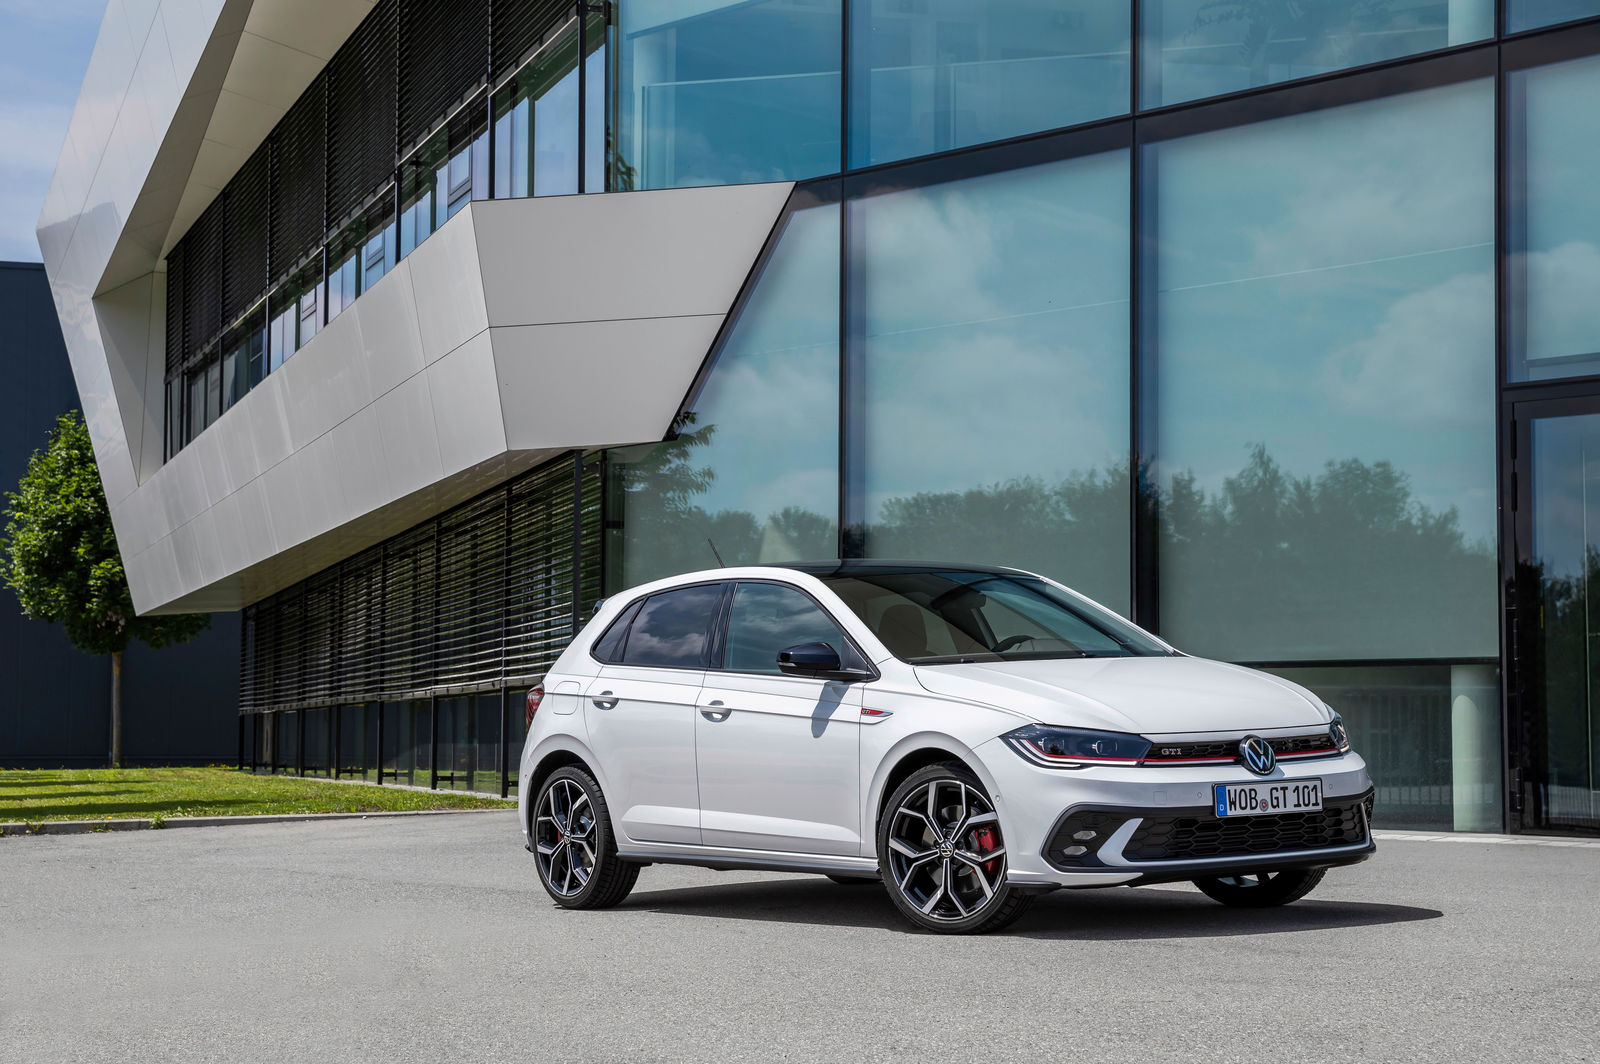 The new Volkswagen Polo GTI